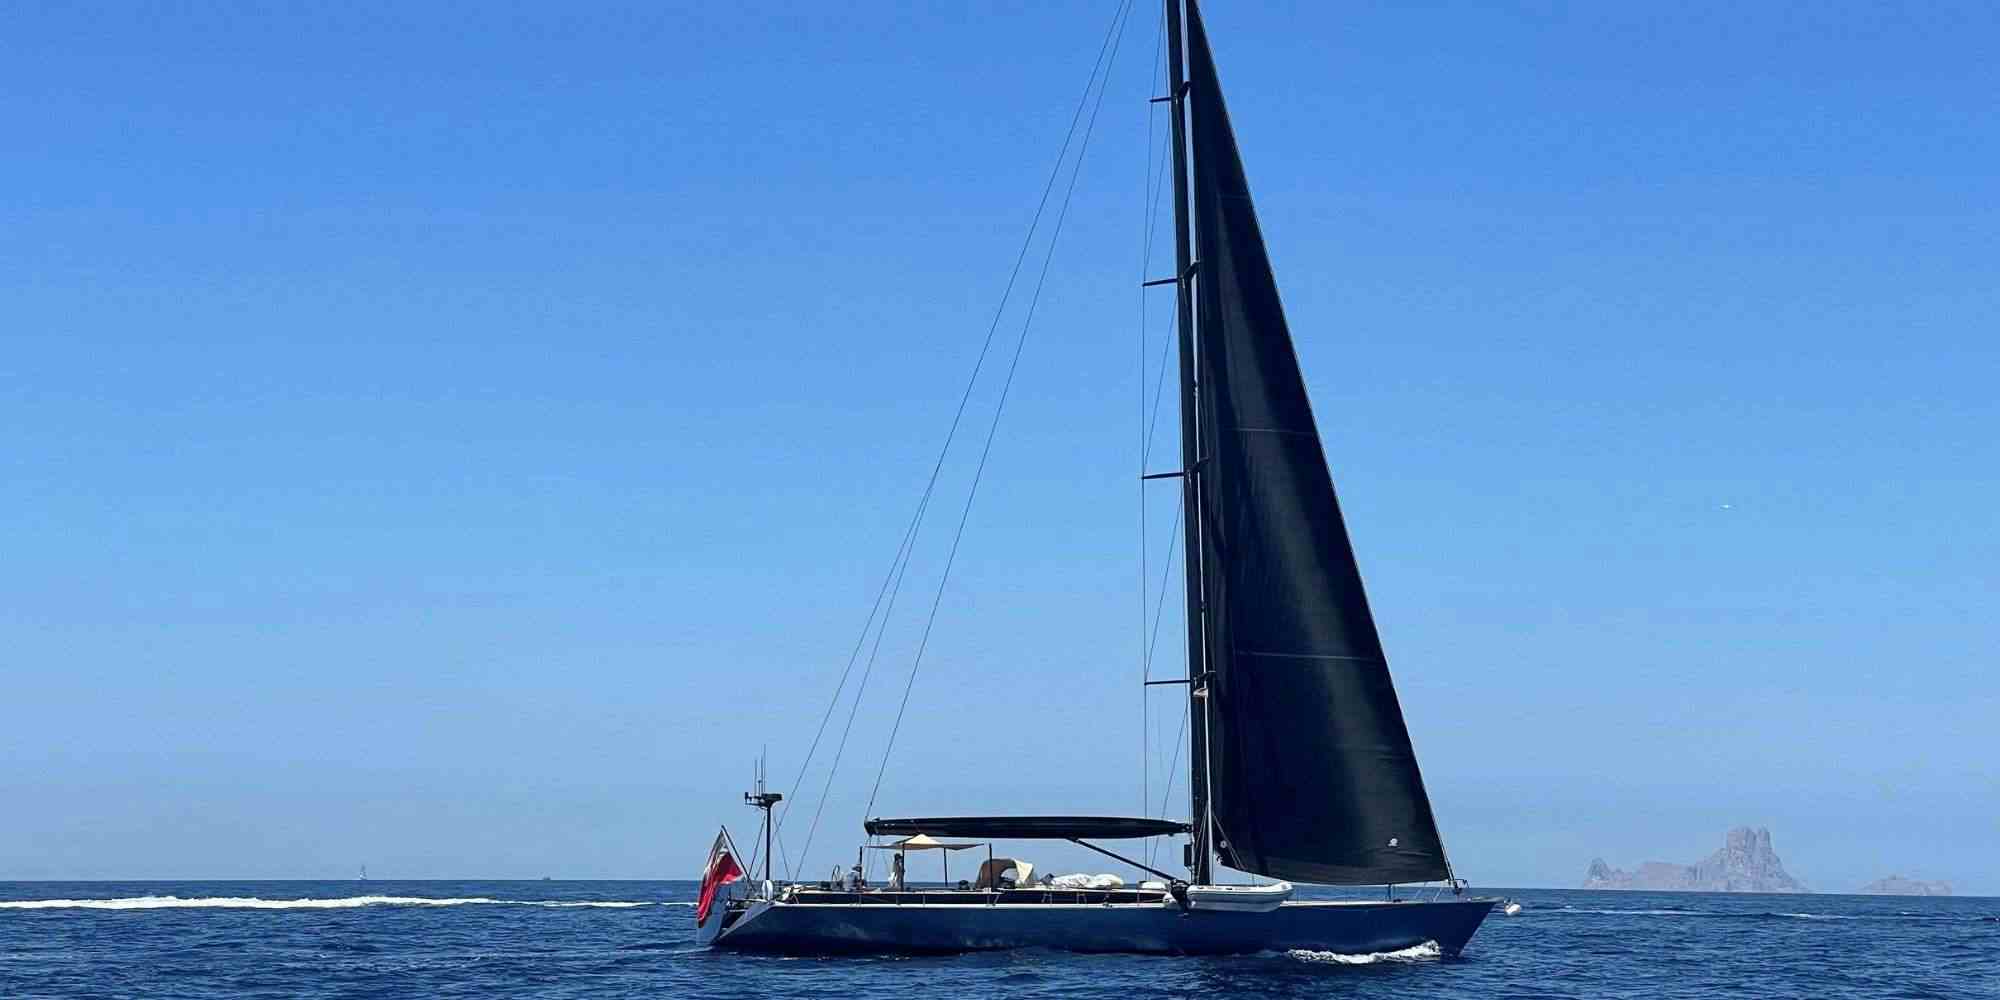 WALLY ONE - Sailboat Charter Montenegro & Boat hire in W. Med -Naples/Sicily, W. Med -Riviera/Cors/Sard., W. Med - Spain/Balearics 1